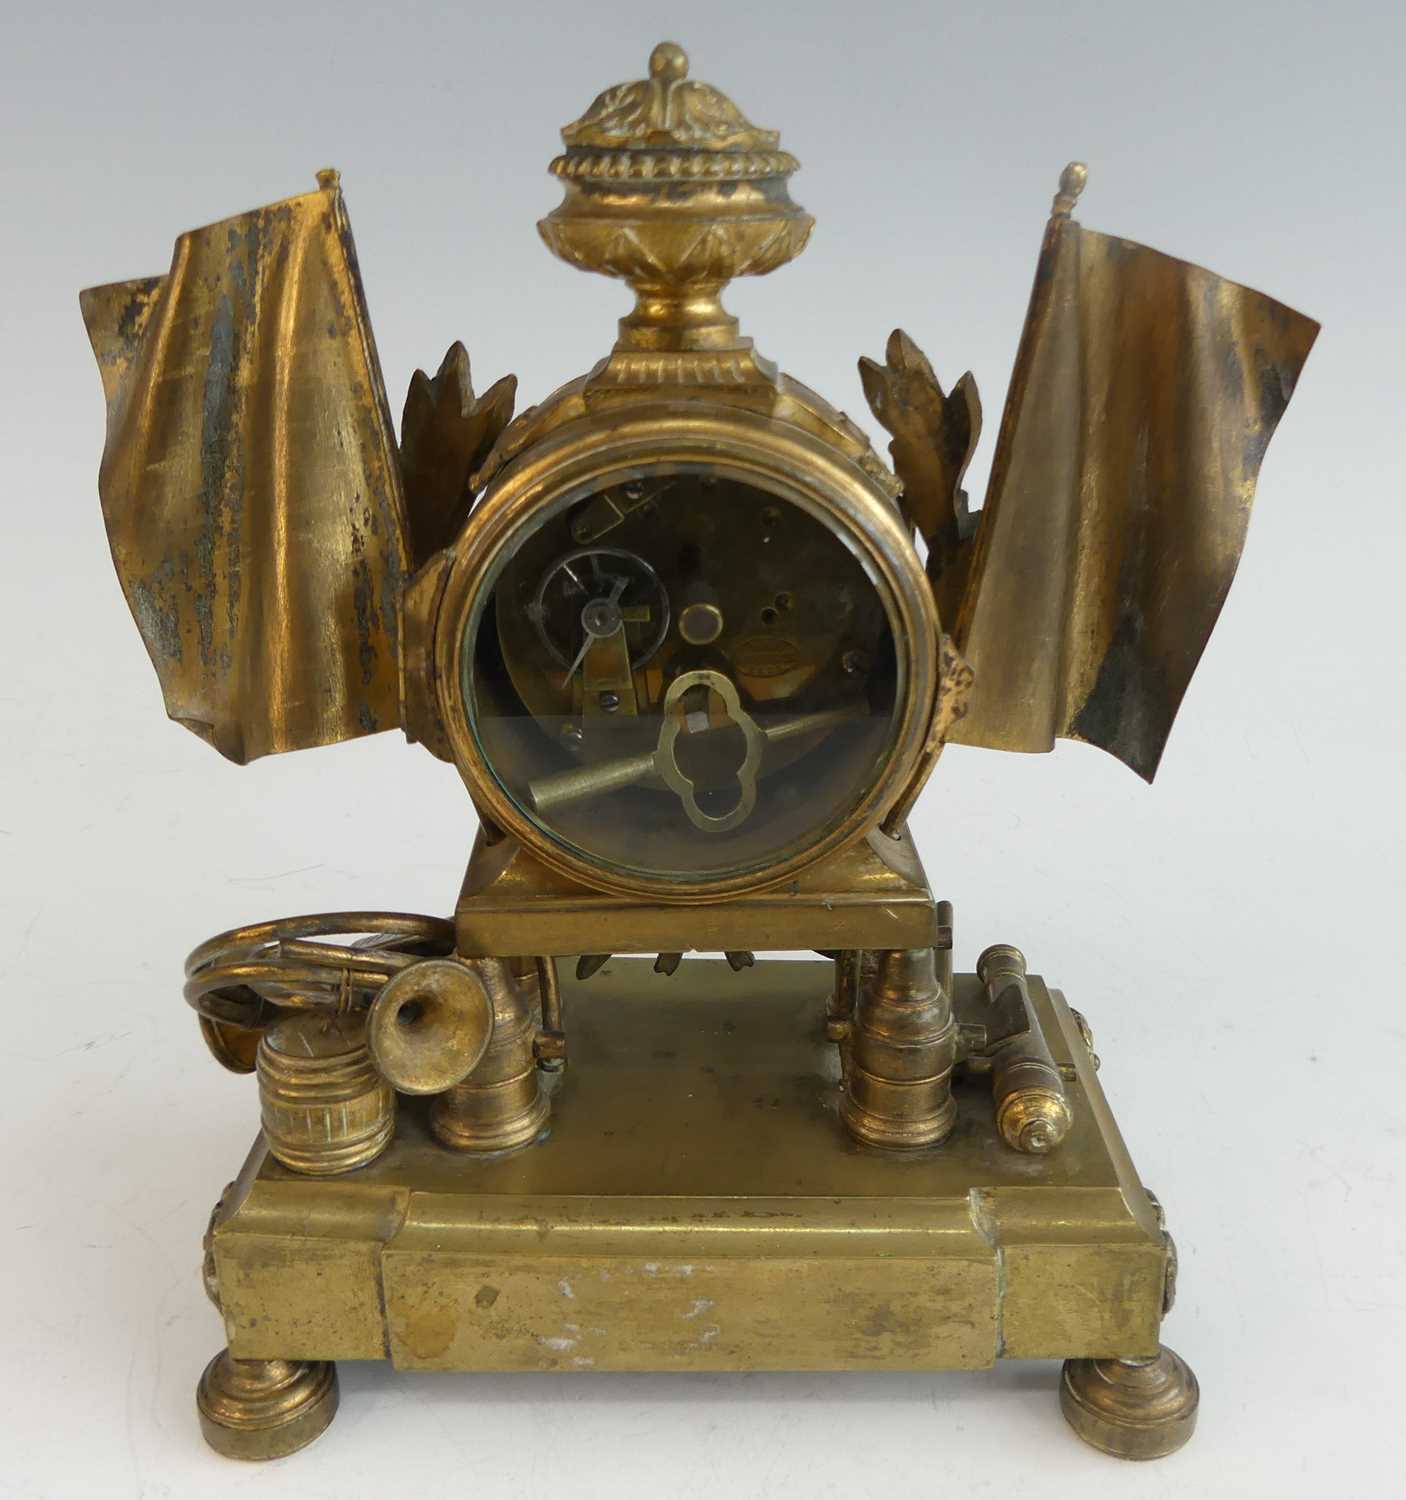 A late 19th century French gilt bronze mantel clock, the case surmounted with a classical style urn, - Image 4 of 5